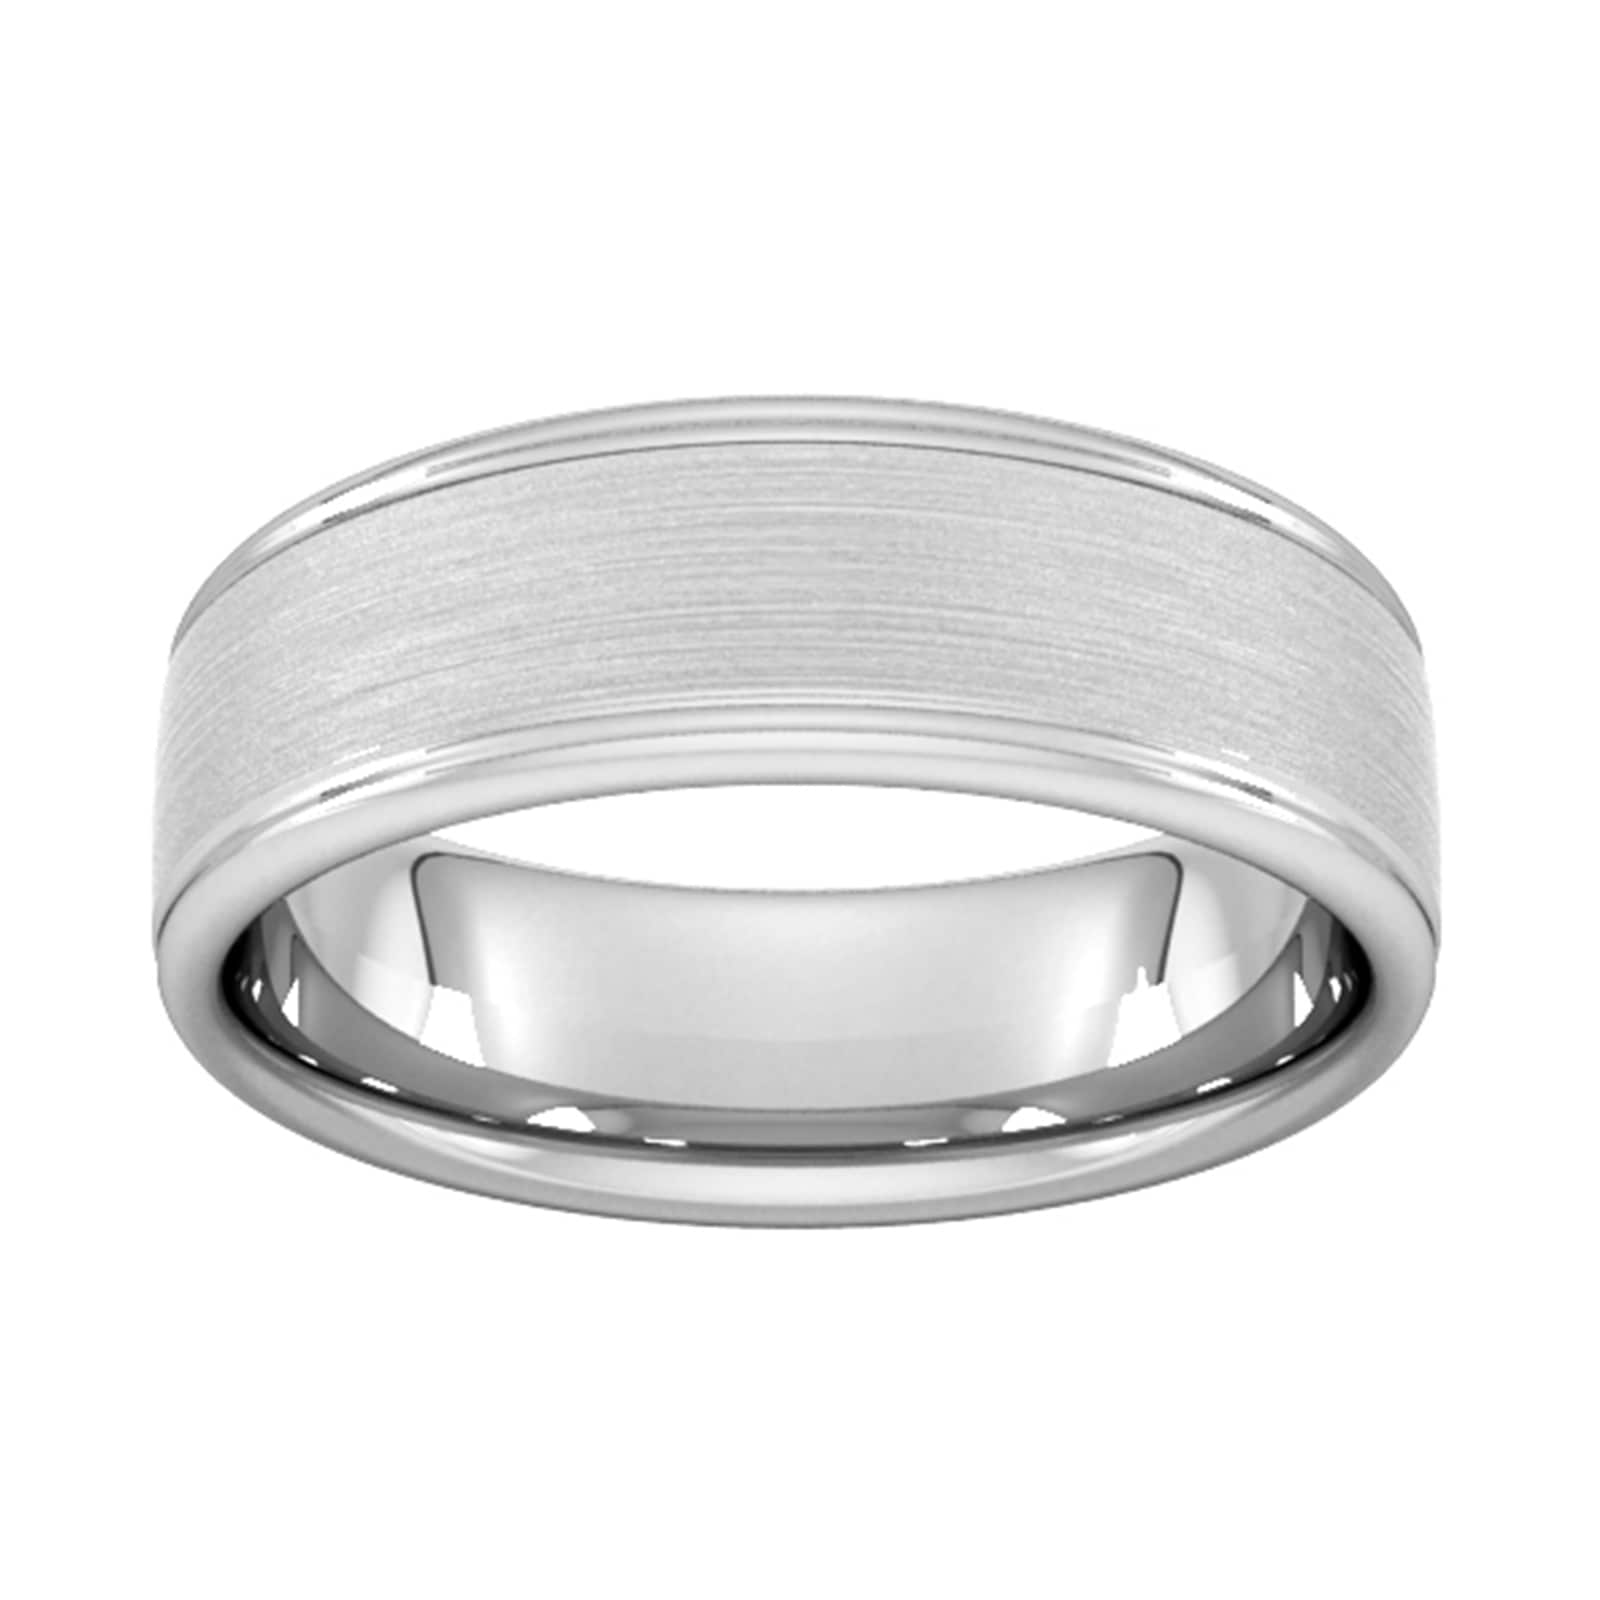 7mm Slight Court Extra Heavy Matt Centre With Grooves Wedding Ring In 9 Carat White Gold - Ring Size S